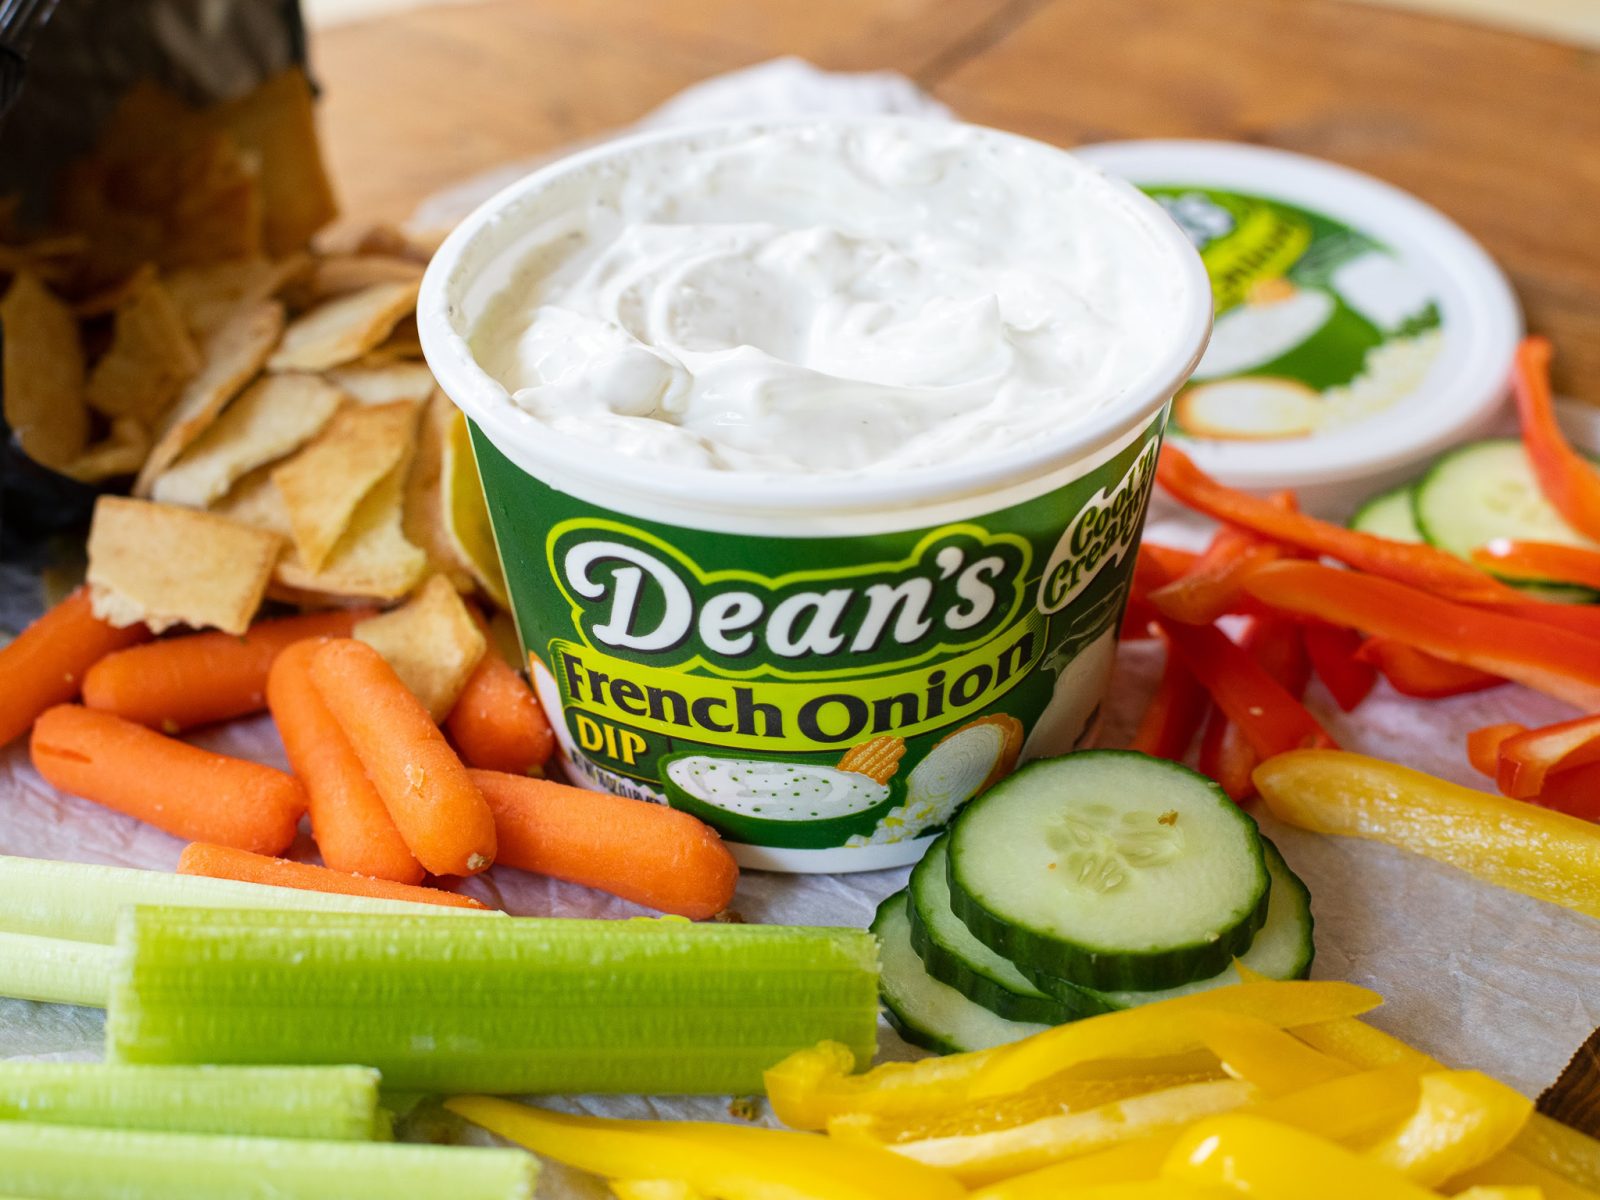 Dean’s Onion Dip Only $1 At Kroger